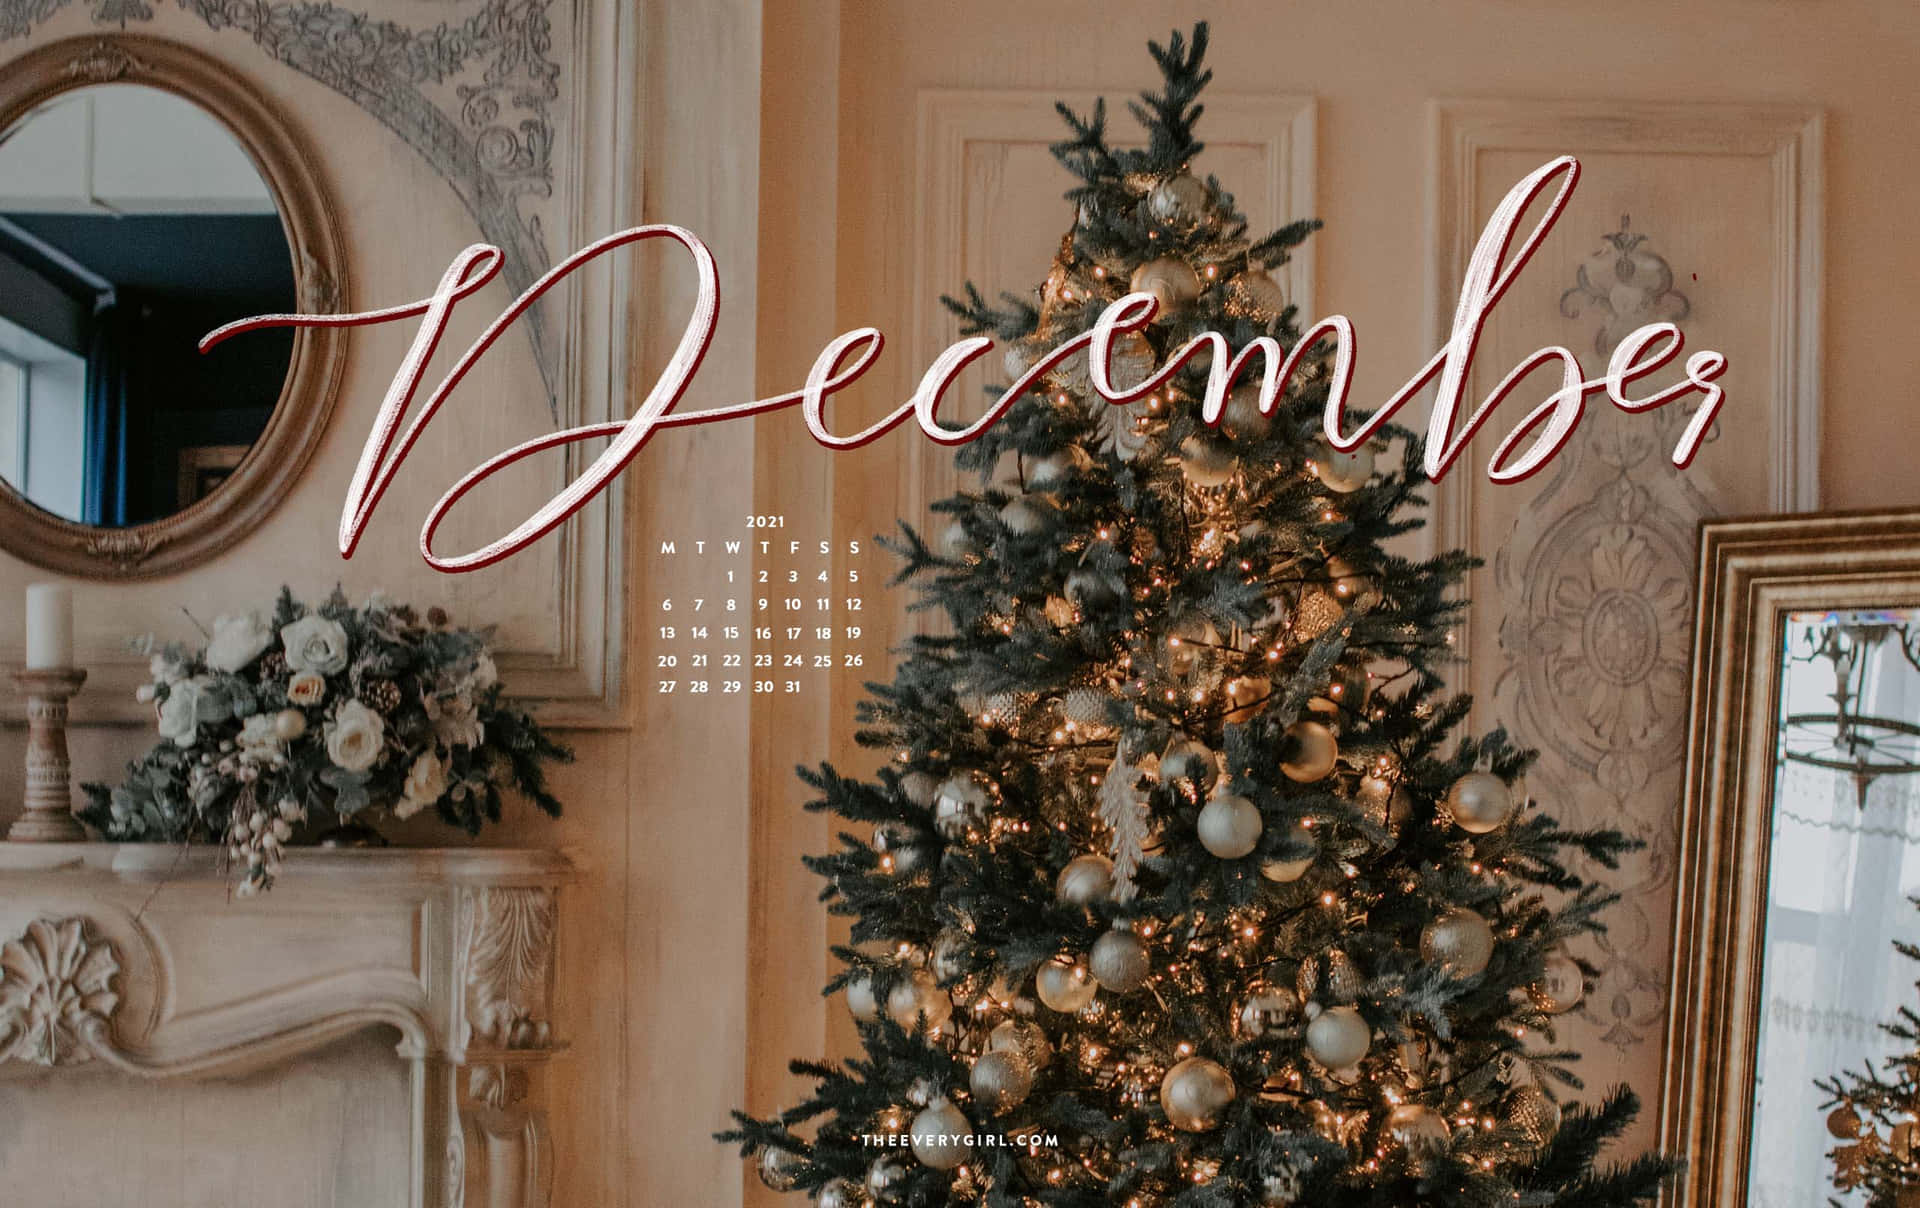 Welcome December with open arms Wallpaper